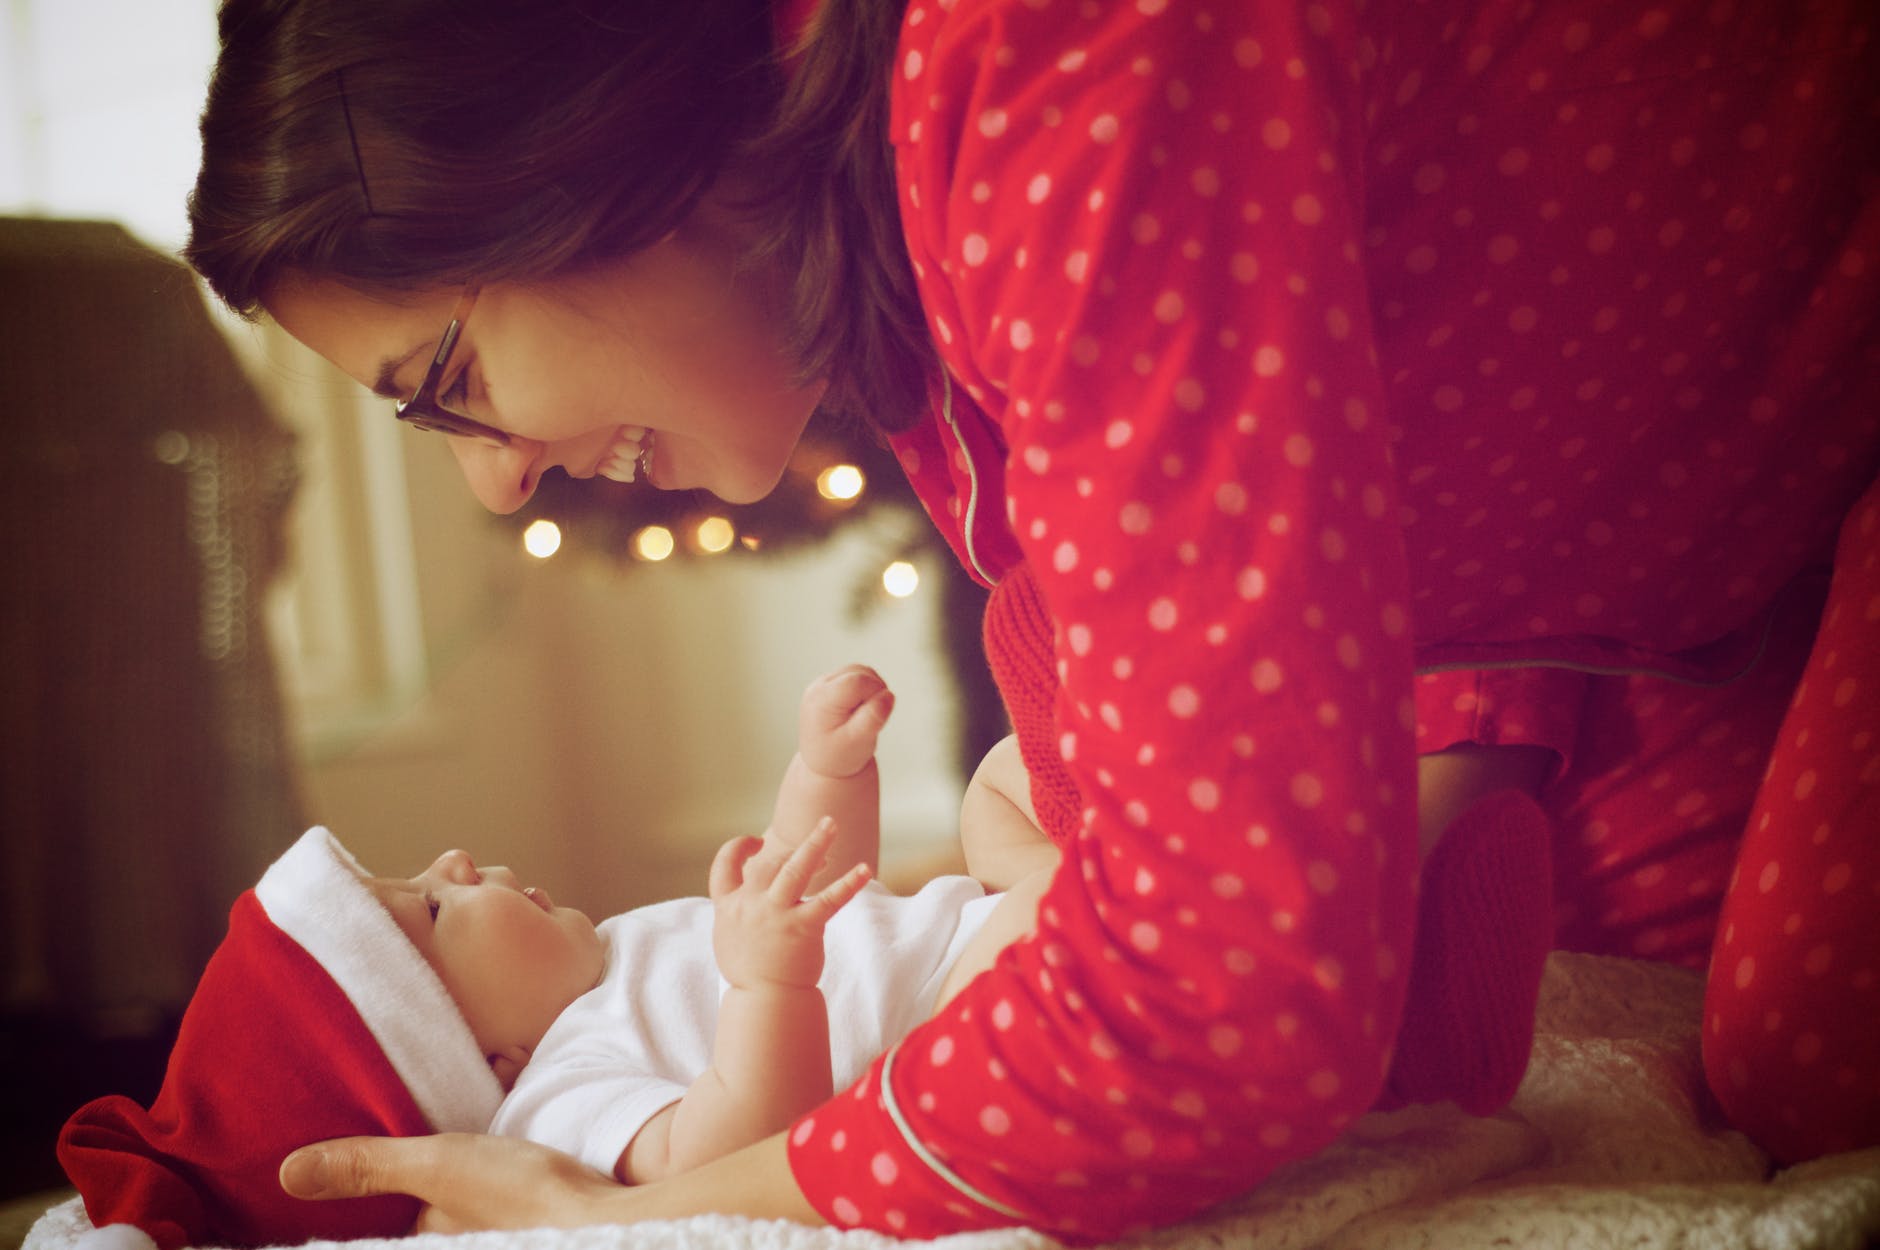 Baby care tips for new moms